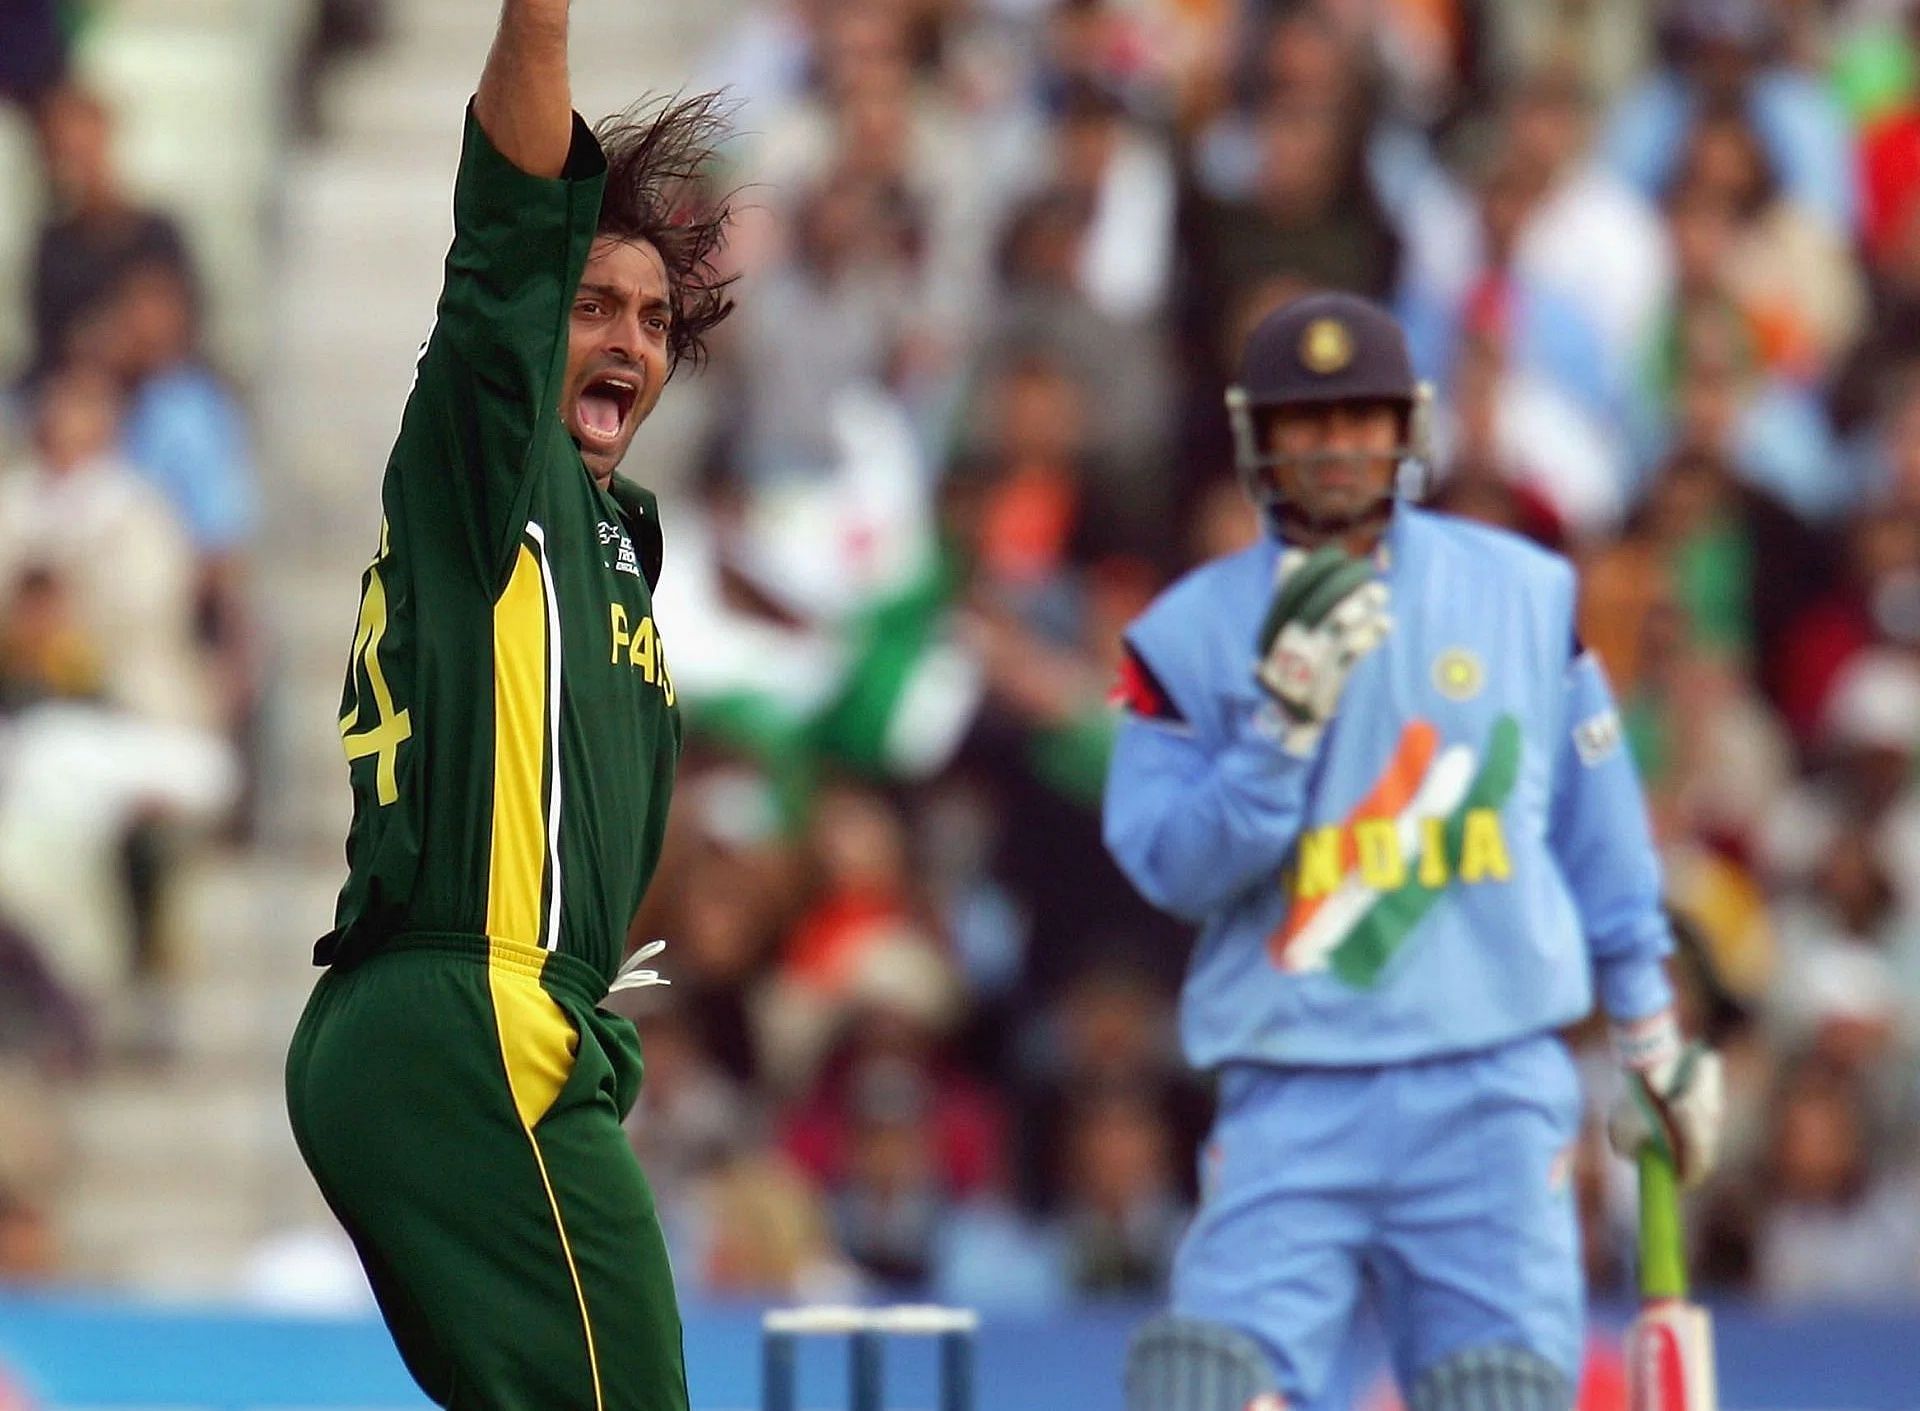 Shoaib Akhtar appeals for the wicket of Mohammad Kaif during the 2004 Champions Trophy. Pic: Getty Images